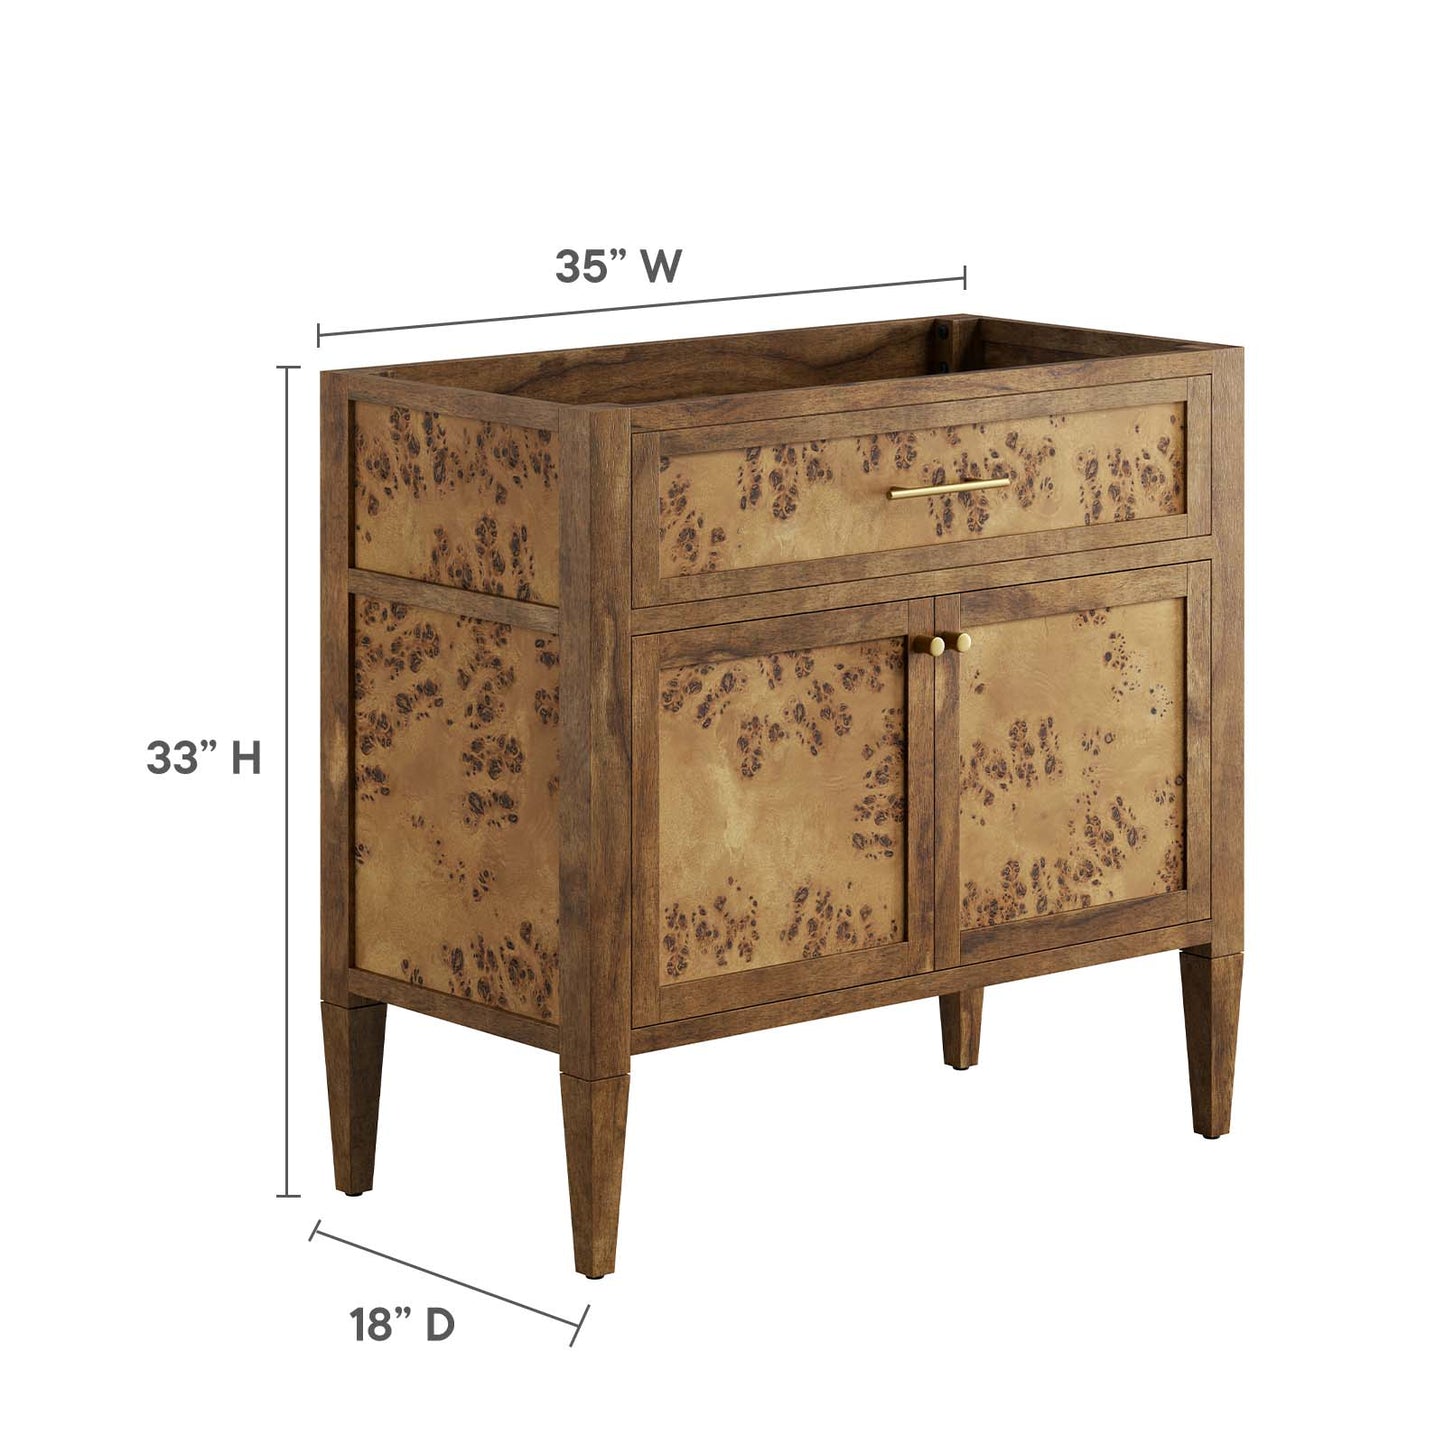 Elysian 36" Wood Bathroom Vanity Cabinet (Sink Basin Not Included) By Modway - EEI-6139 | Bathroom Accessories | Modway - 8